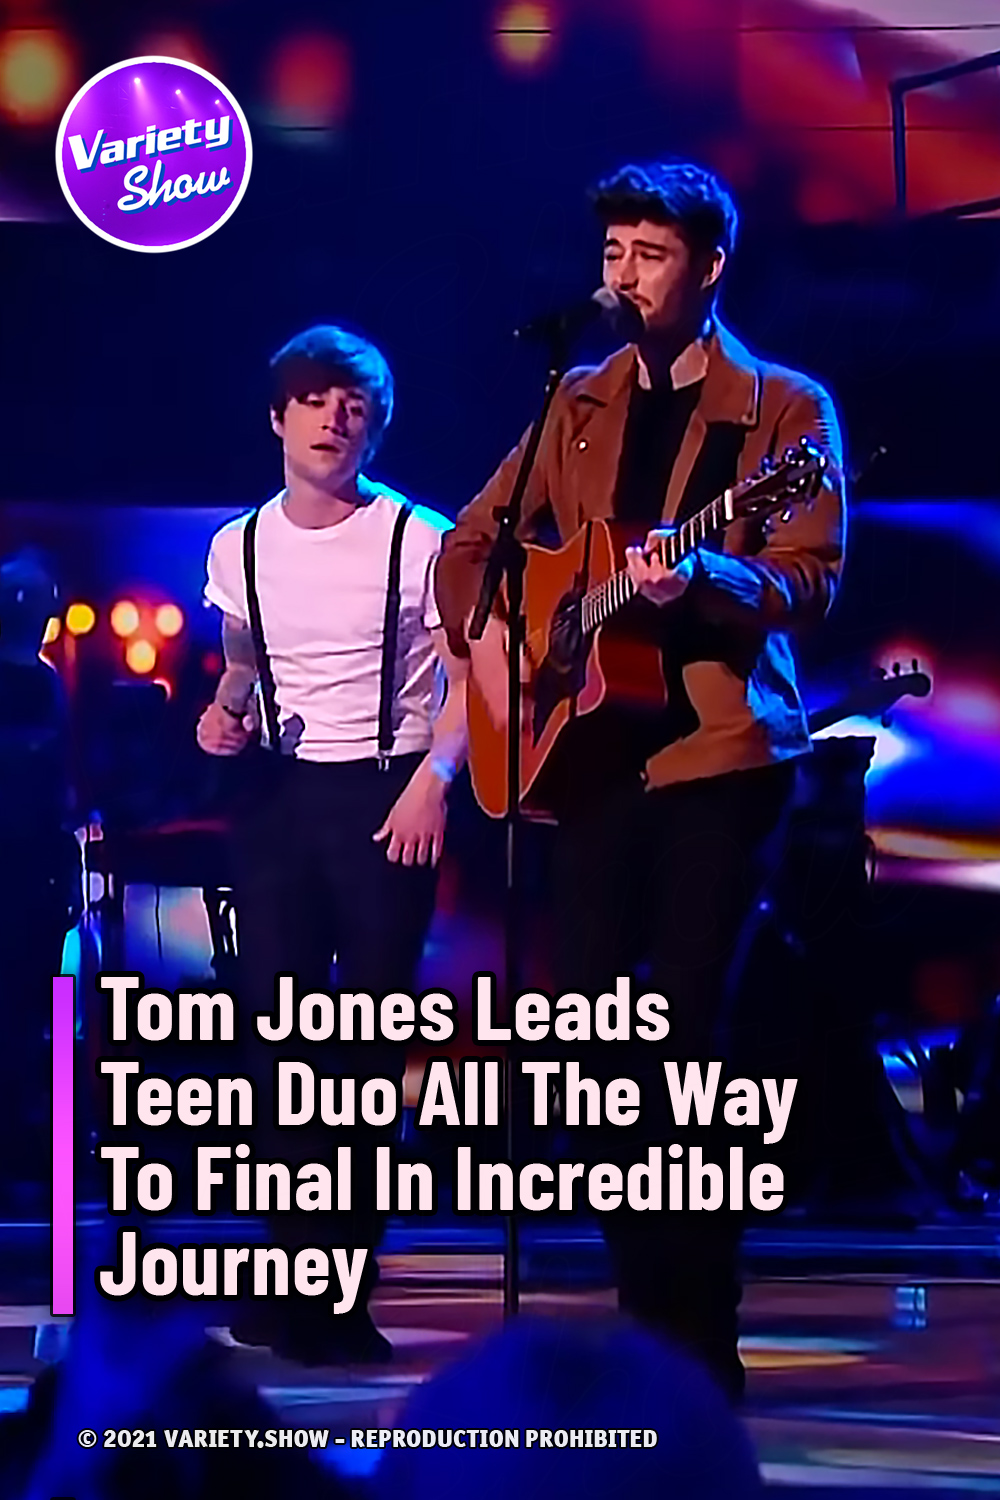 Tom Jones Leads Teen Duo All The Way To Final In Incredible Journey